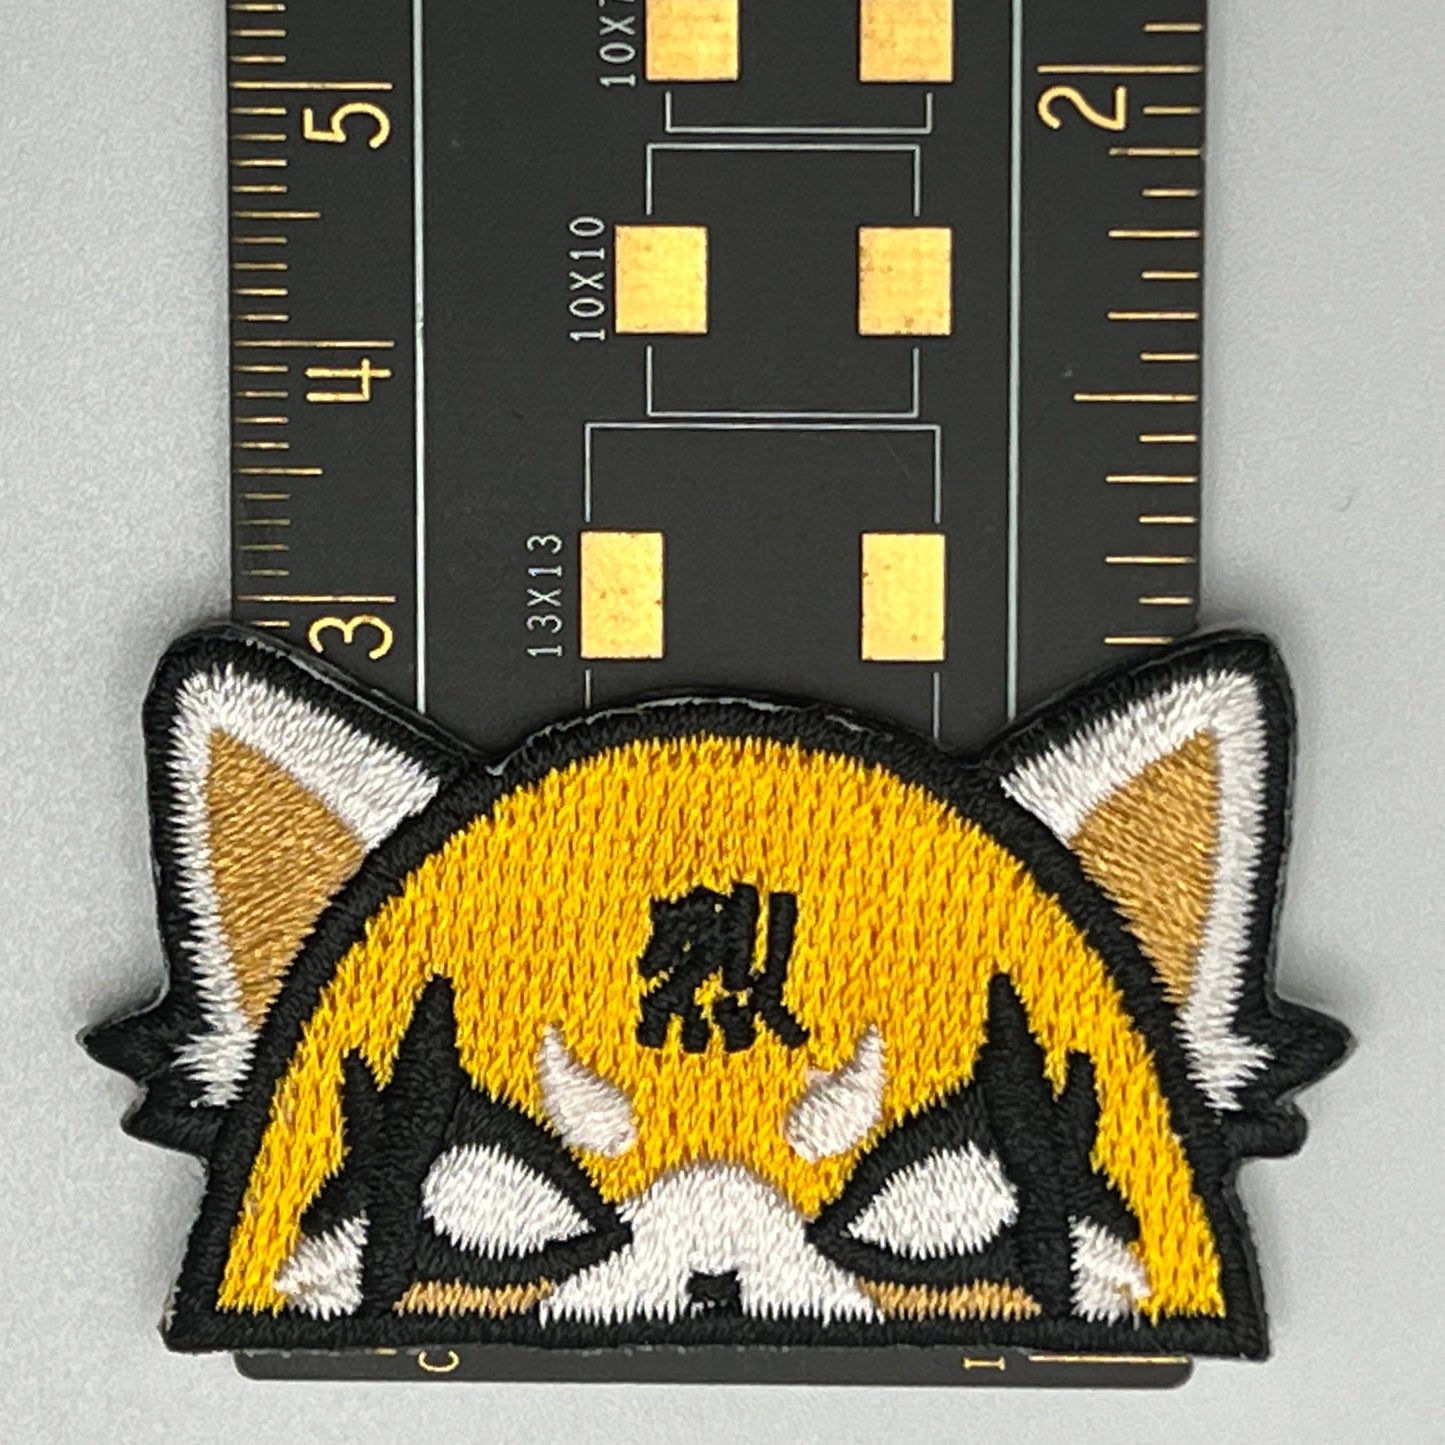 Embroidered Anime Iron-On Patches for Jacket, Shirt, Hat - Free Shipping!